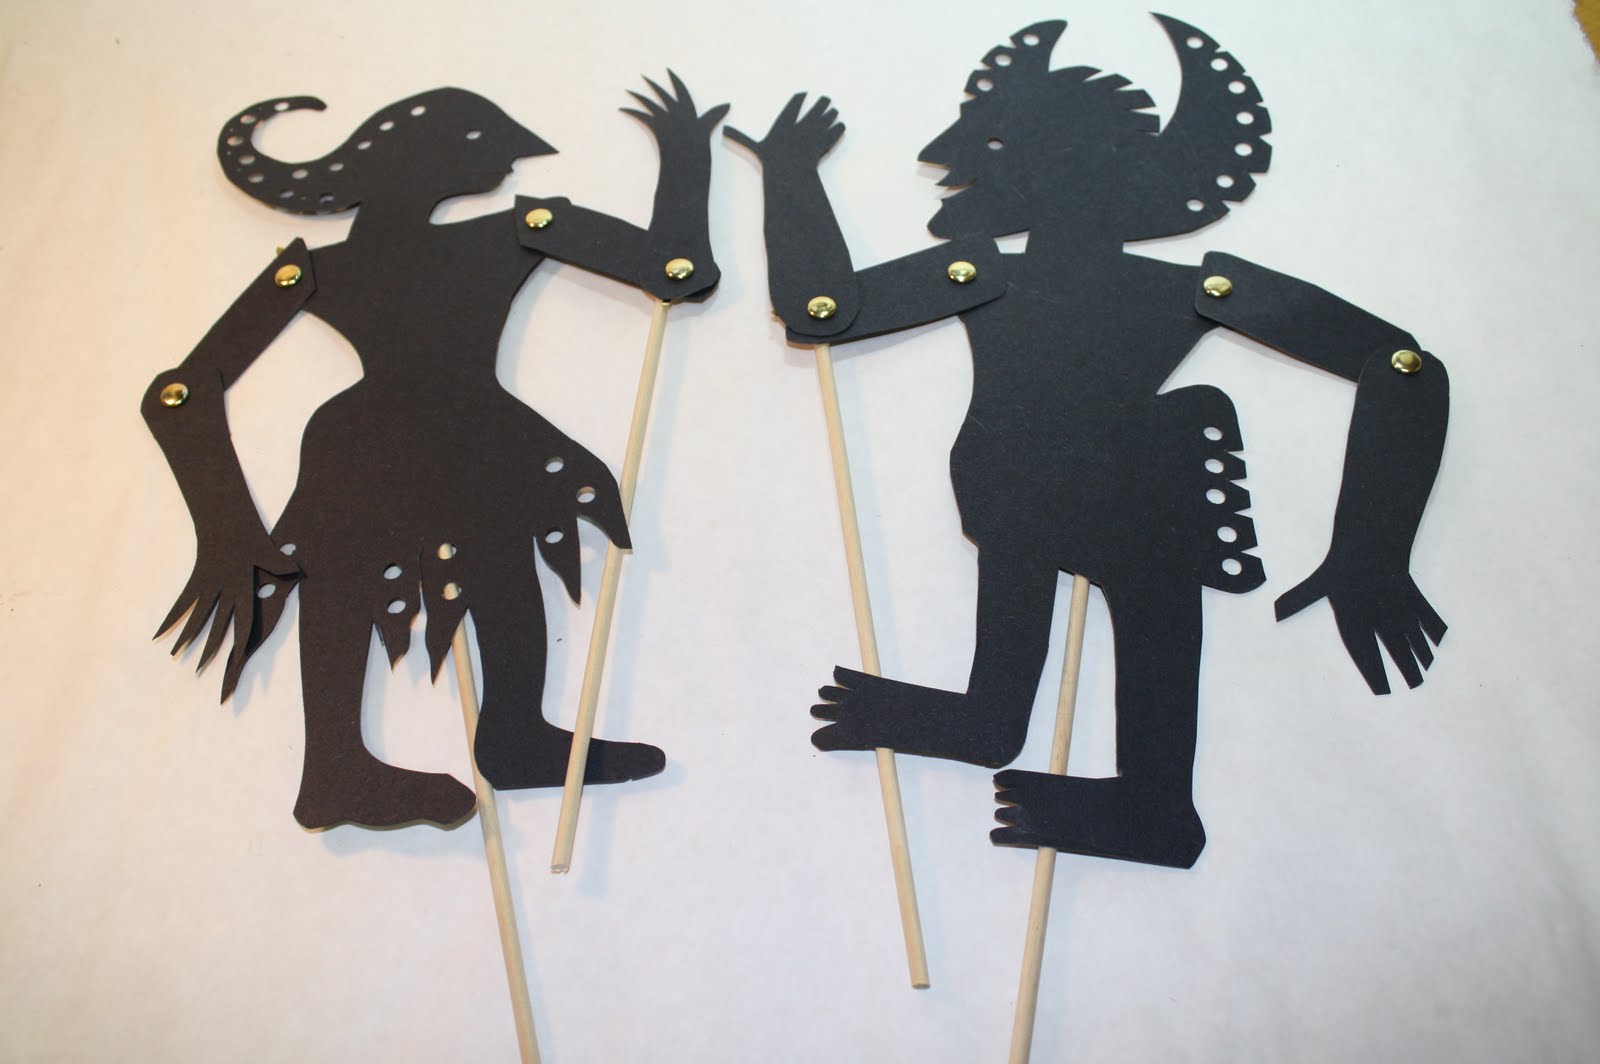 heidi-boyd-playing-with-shadow-puppets